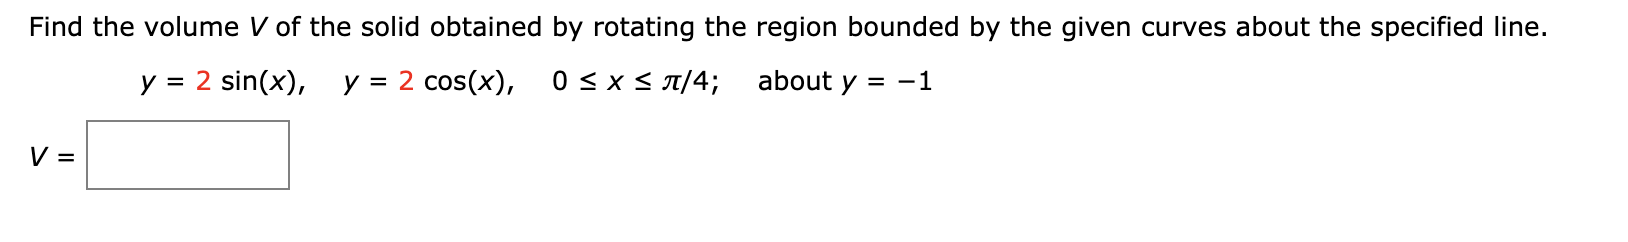 Find the volume V of the solid obtained by rotating the region bounded by the given curves about the specified Iline.
y = 2 sin(x), y = 2 cos(x),
0 < x < 1/4;
about y = -1
V =
